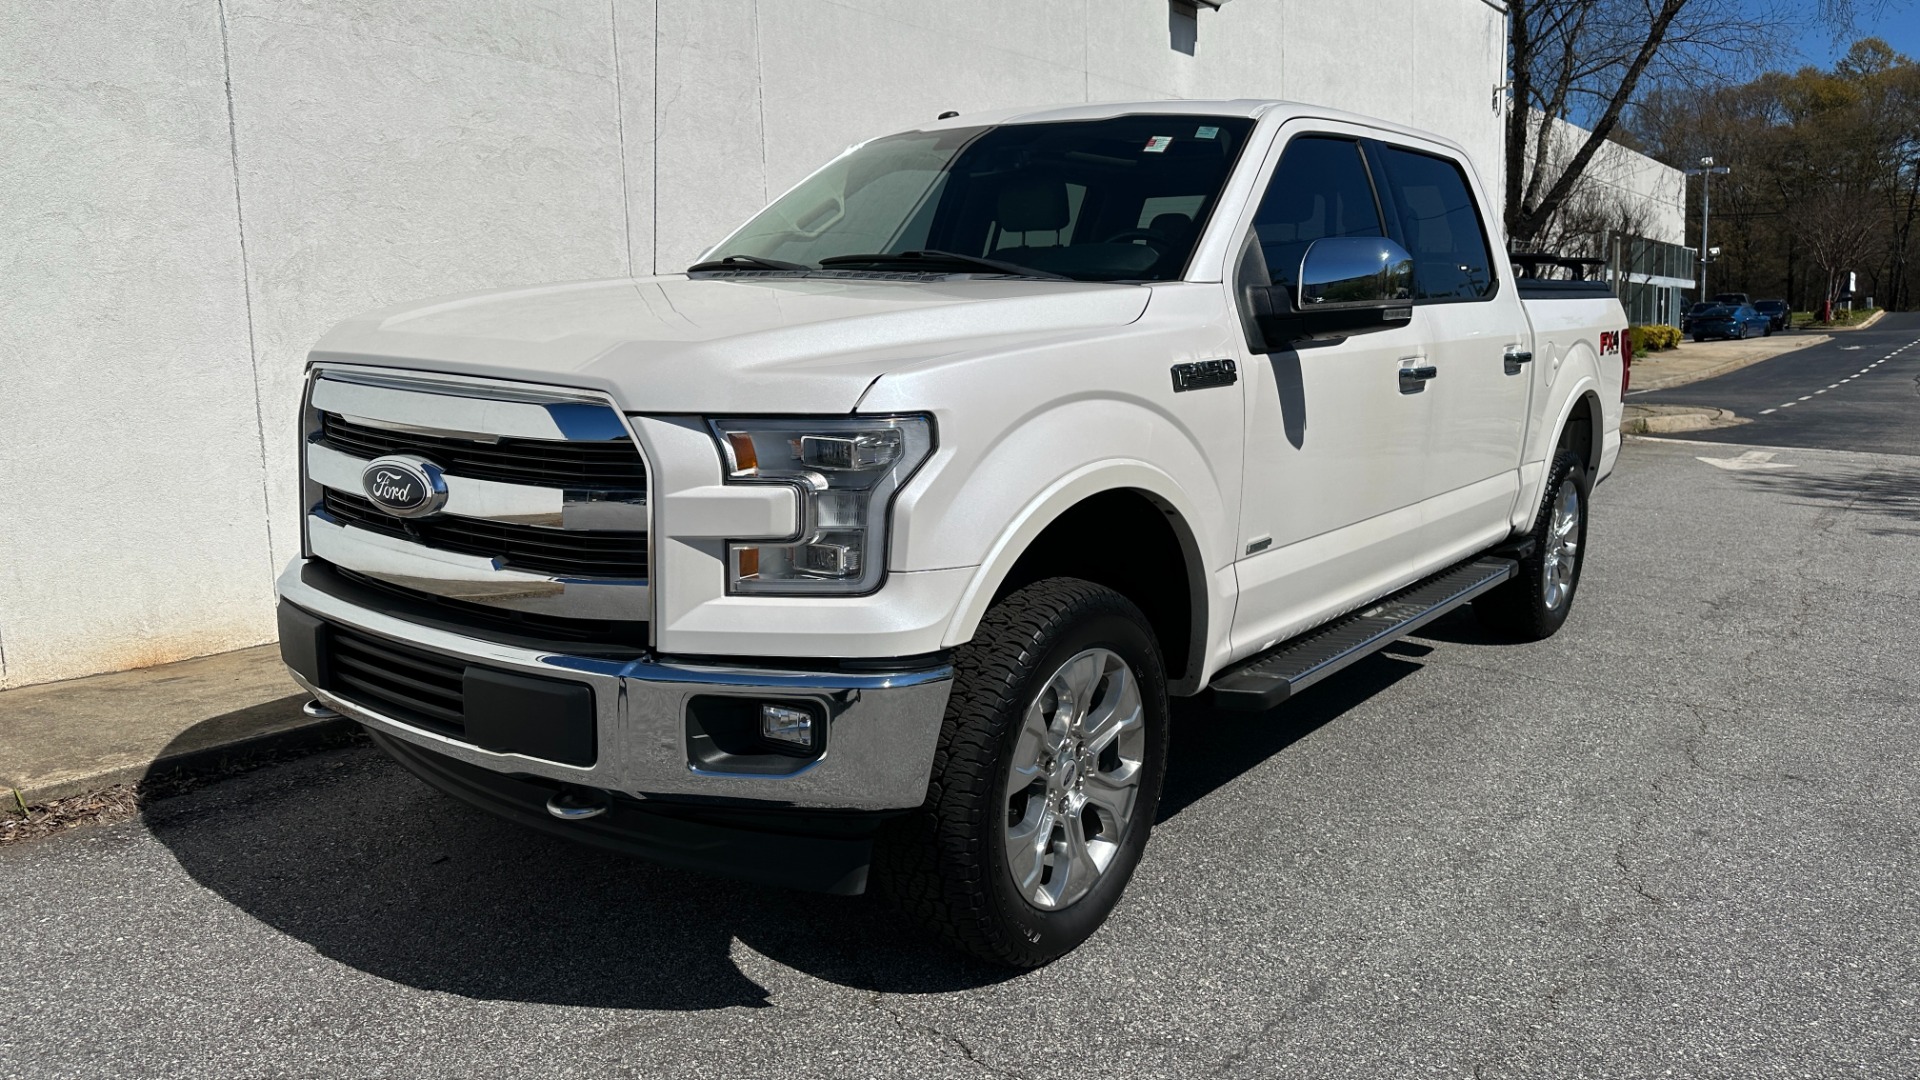 Used 2017 Ford F-150 LARIAT / FX4 OFFROAD PKG / TECHNOLOGY PKG / MOONROOF for sale $34,995 at Formula Imports in Charlotte NC 28227 2